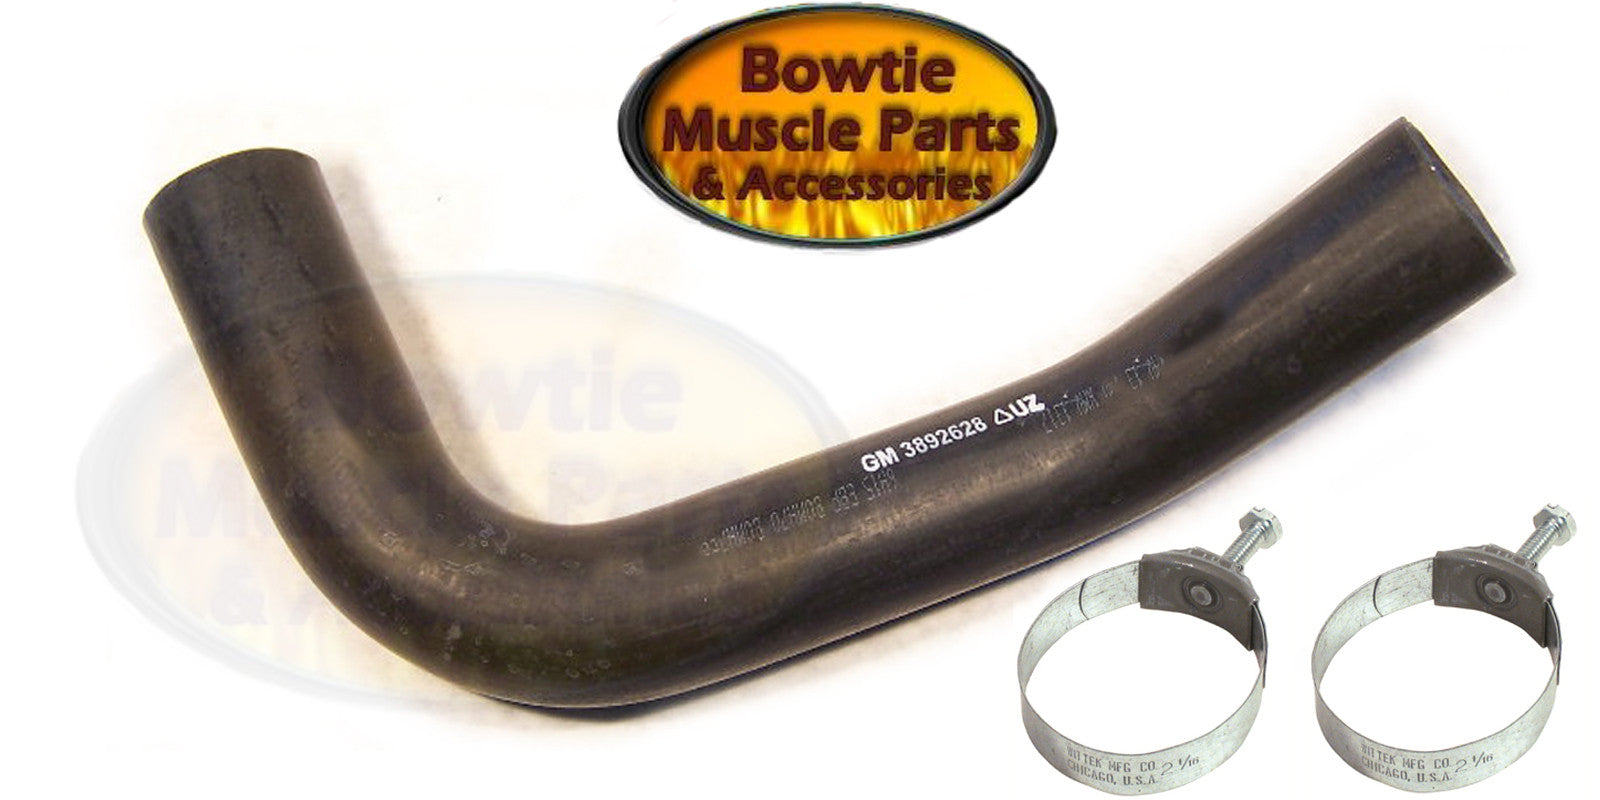 67 68 CAMARO LOWER RADIATOR HOSE GM PART 3892628 FOR 302 327 350 W/TOWER CLAMPS